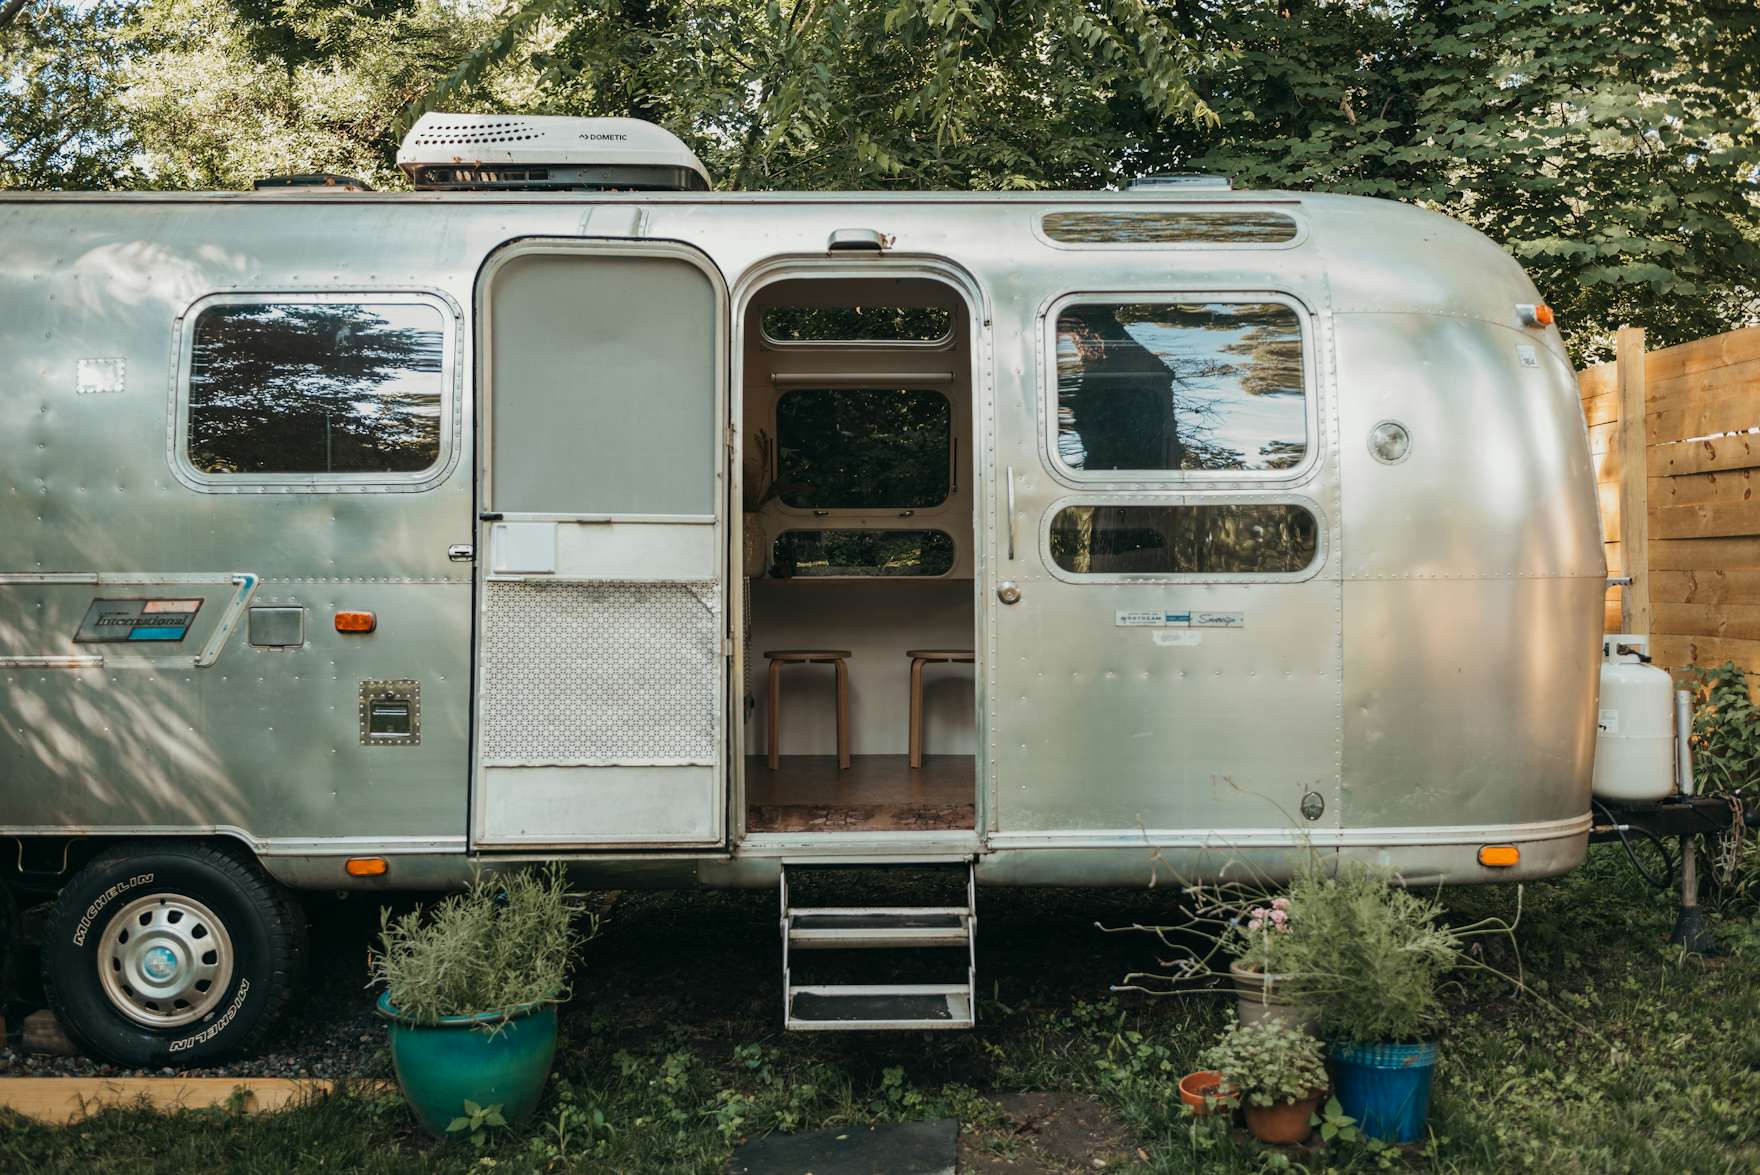 Photo 1 of 13 in A 1973 Airstream Gets an Organic Remodel Inspired by ...